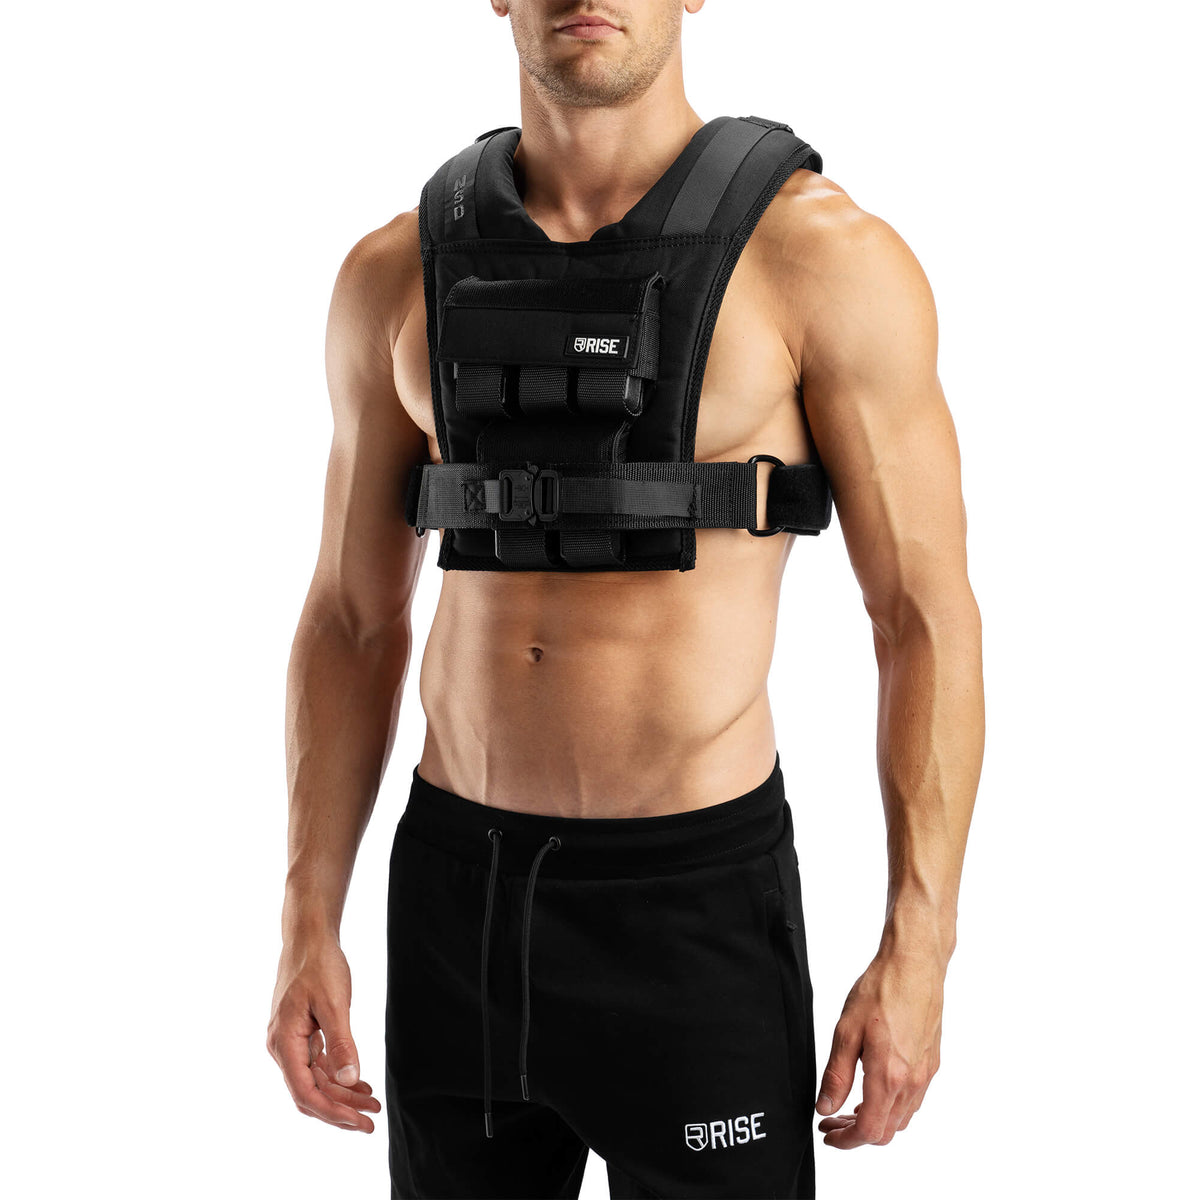 8 Benefits of Running with a Weighted Vest